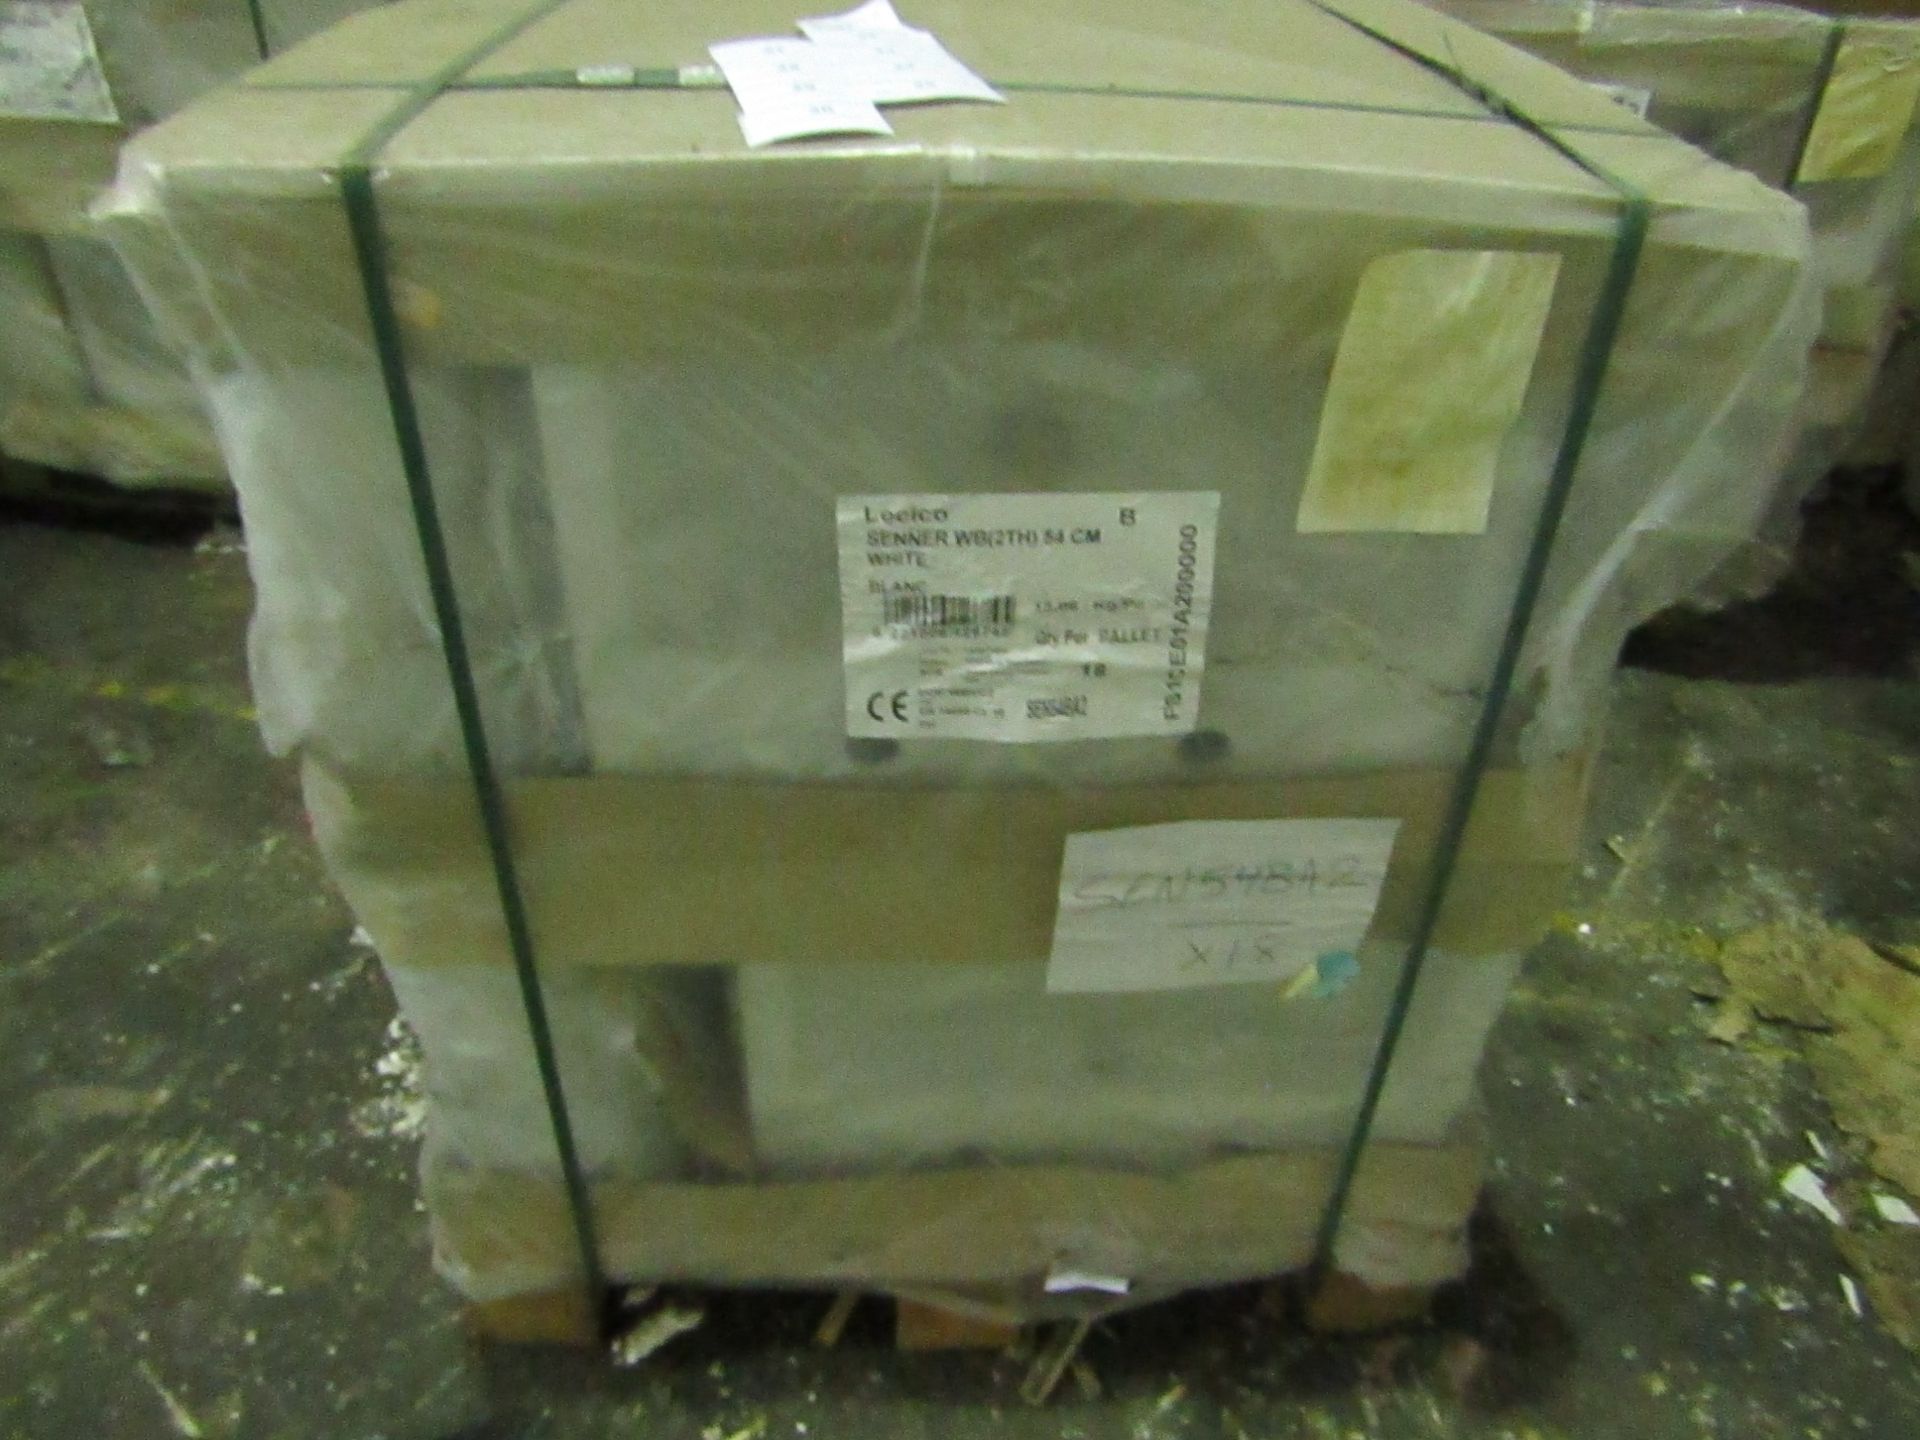 Pallet of approx 18, Lecico 2 tap hole 54cm basins, new